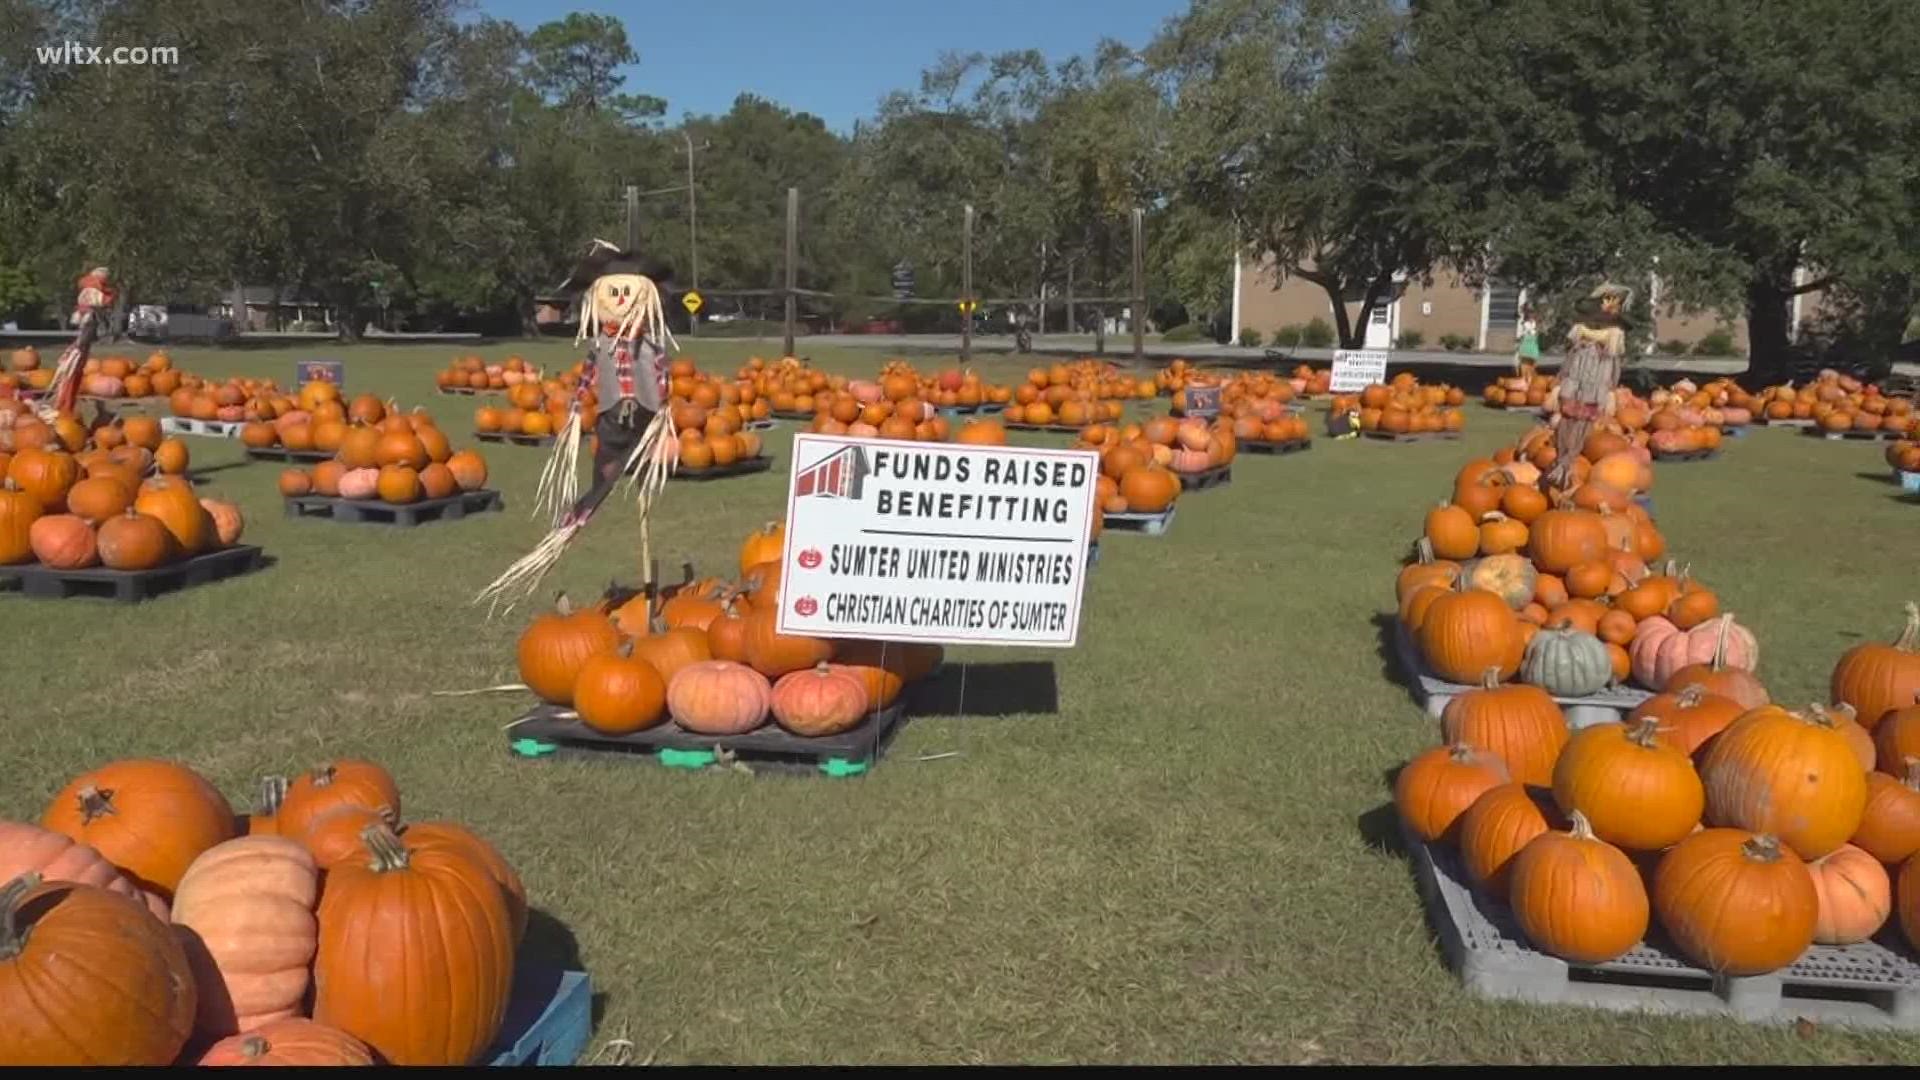 5,000 pumpkins are for sale to help fundraise for Sumter United Ministries.